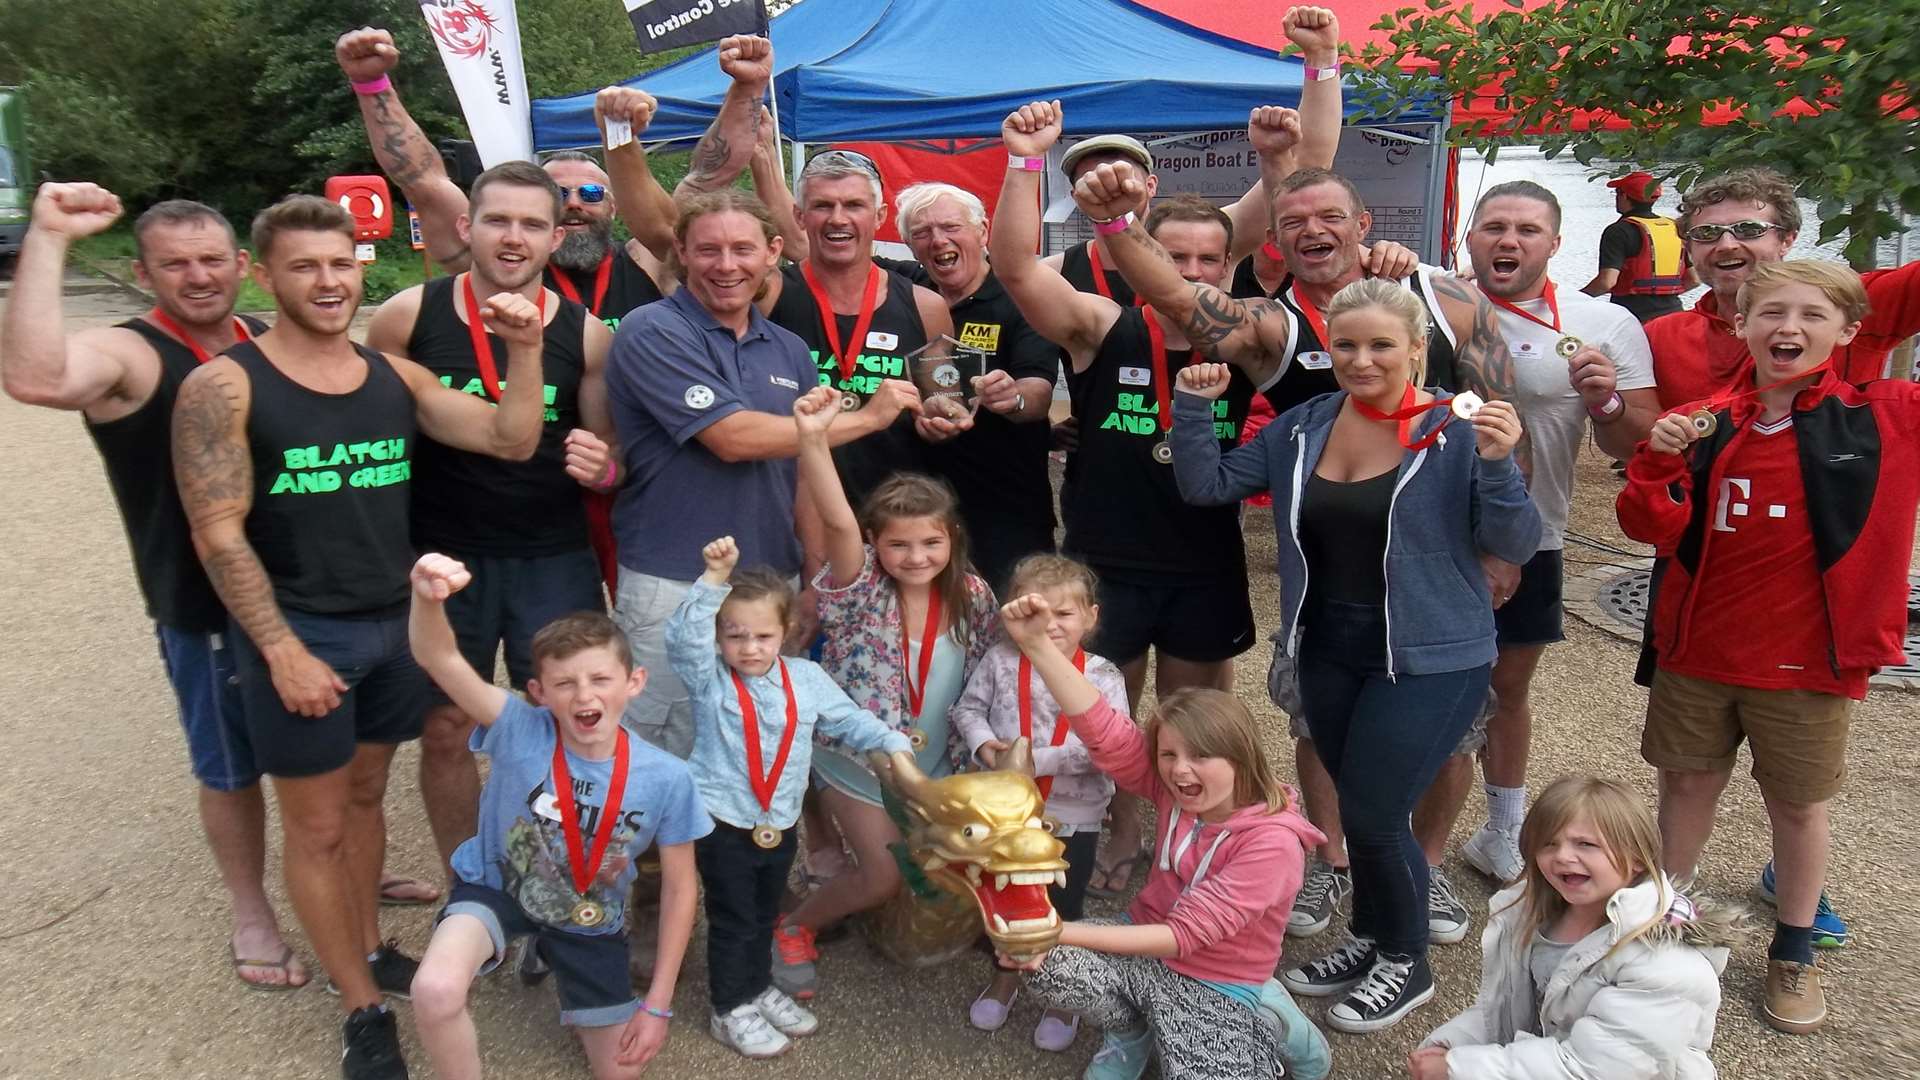 Blatch and Green received the winners trophy and medals in the grand final at the KM Dragon Boat Race from Stuart Clarke of Mote Park Water Sports Centre and Martin Vye, chairman of the KM Charity Team. Blatch and Green from Whitstable raised funds for Cancer Research UK